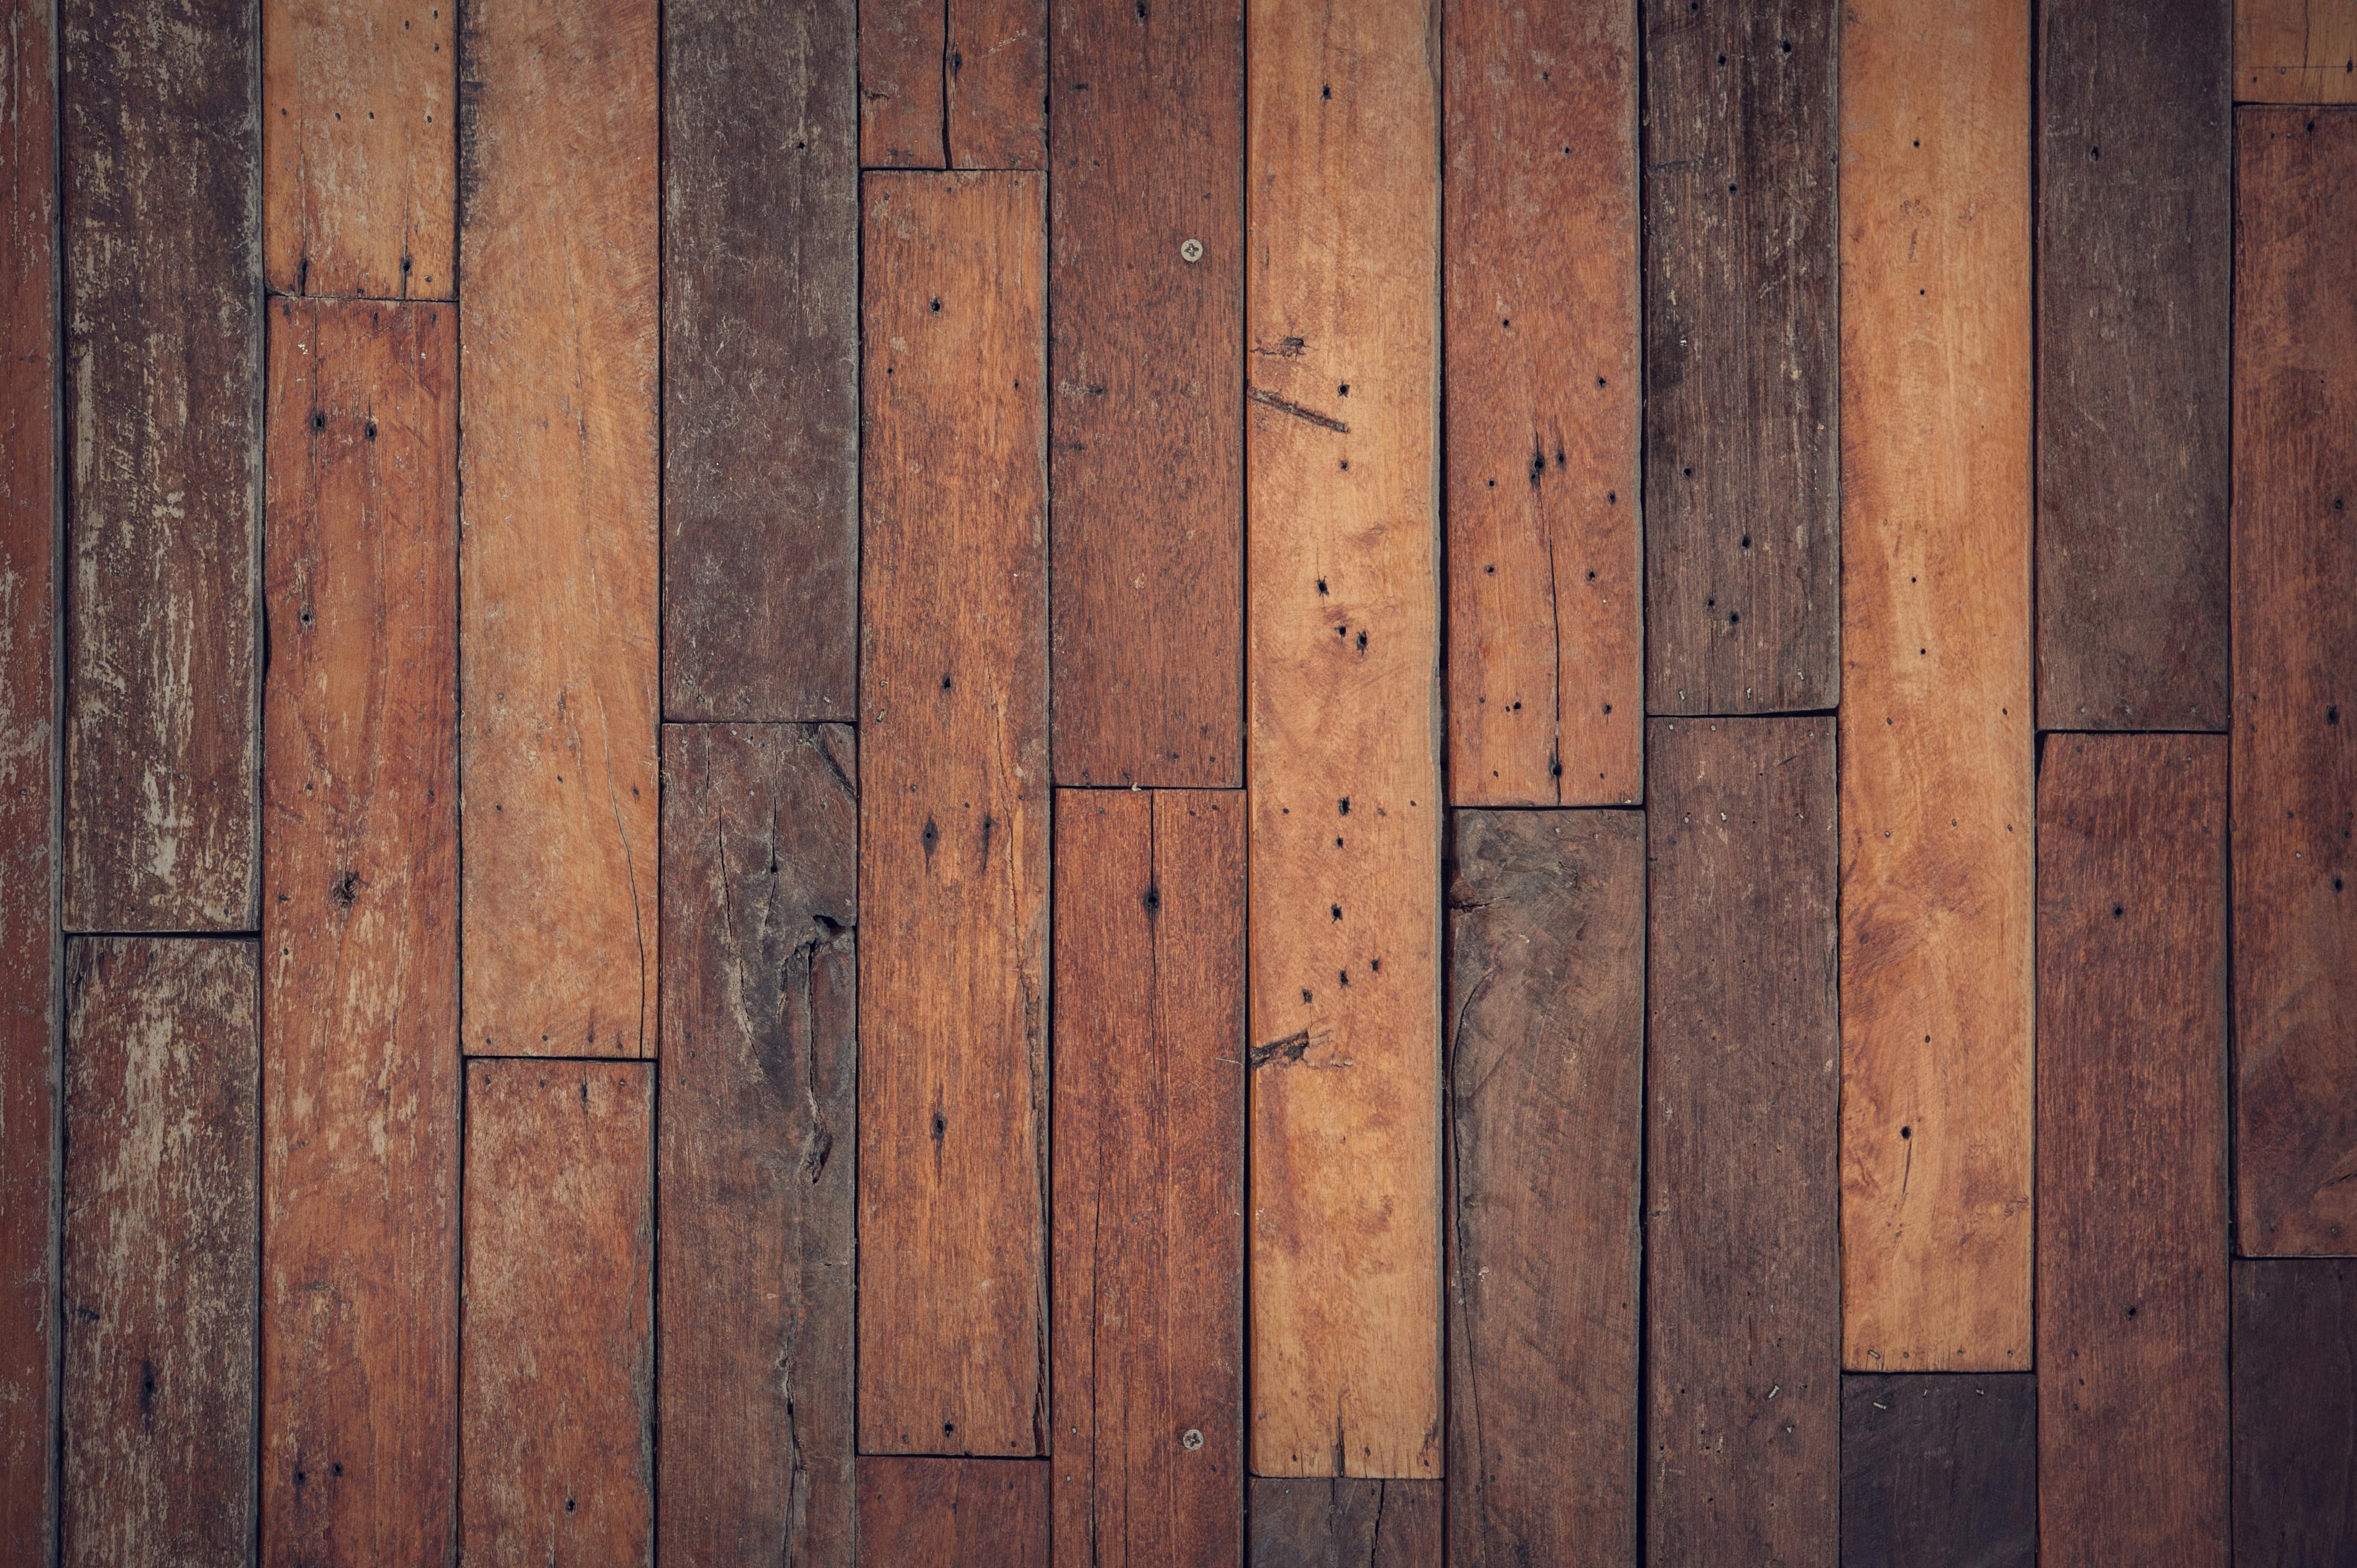 Free Nice wood background Images for personal and commercial use